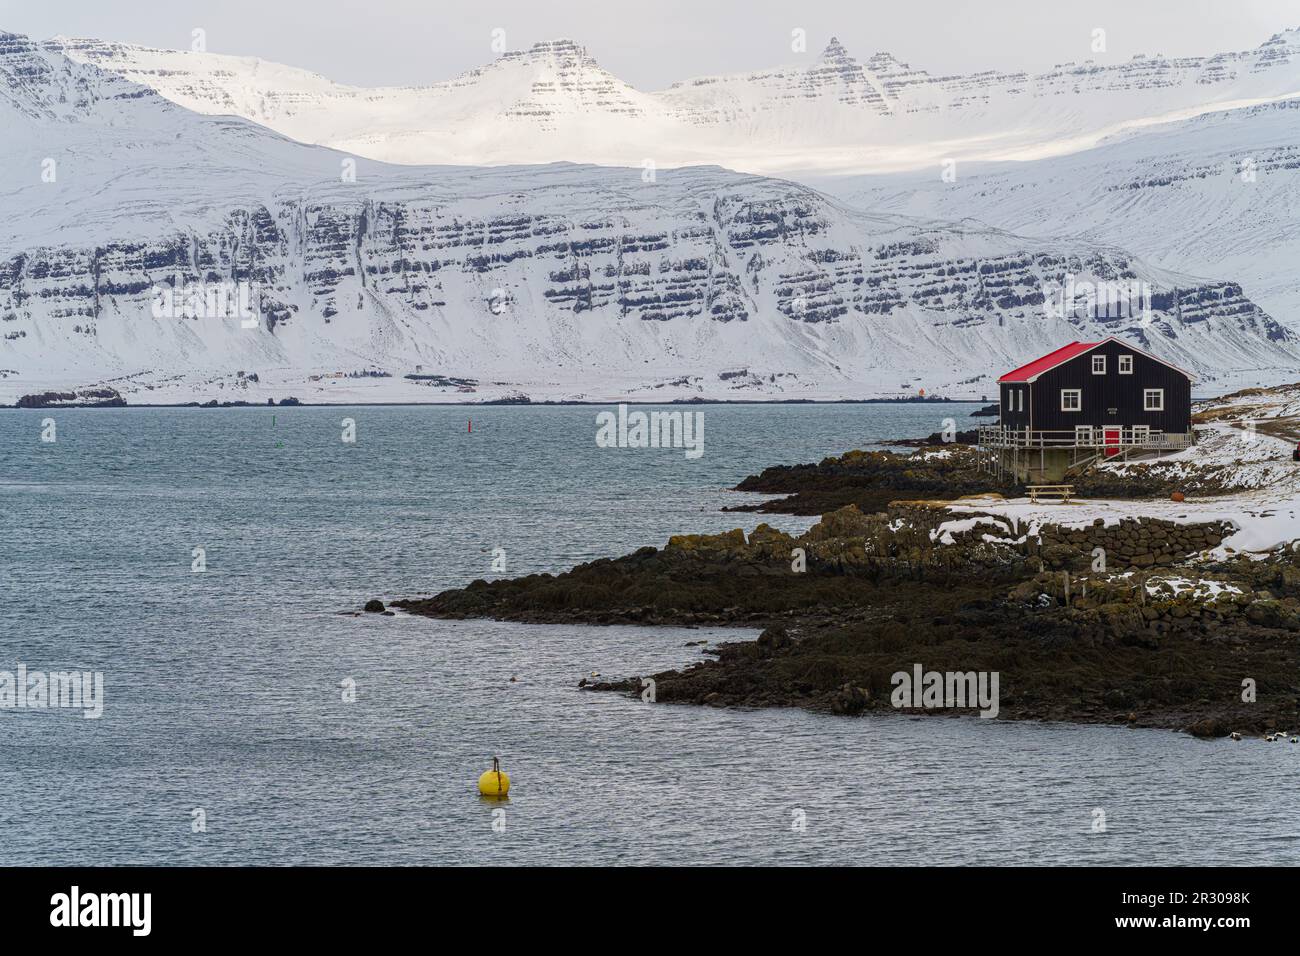 Djúpivogur is a small fishing town located in the Austurland (Eastern Region) part of Iceland close to the Vatnajökull National Park. Stock Photo